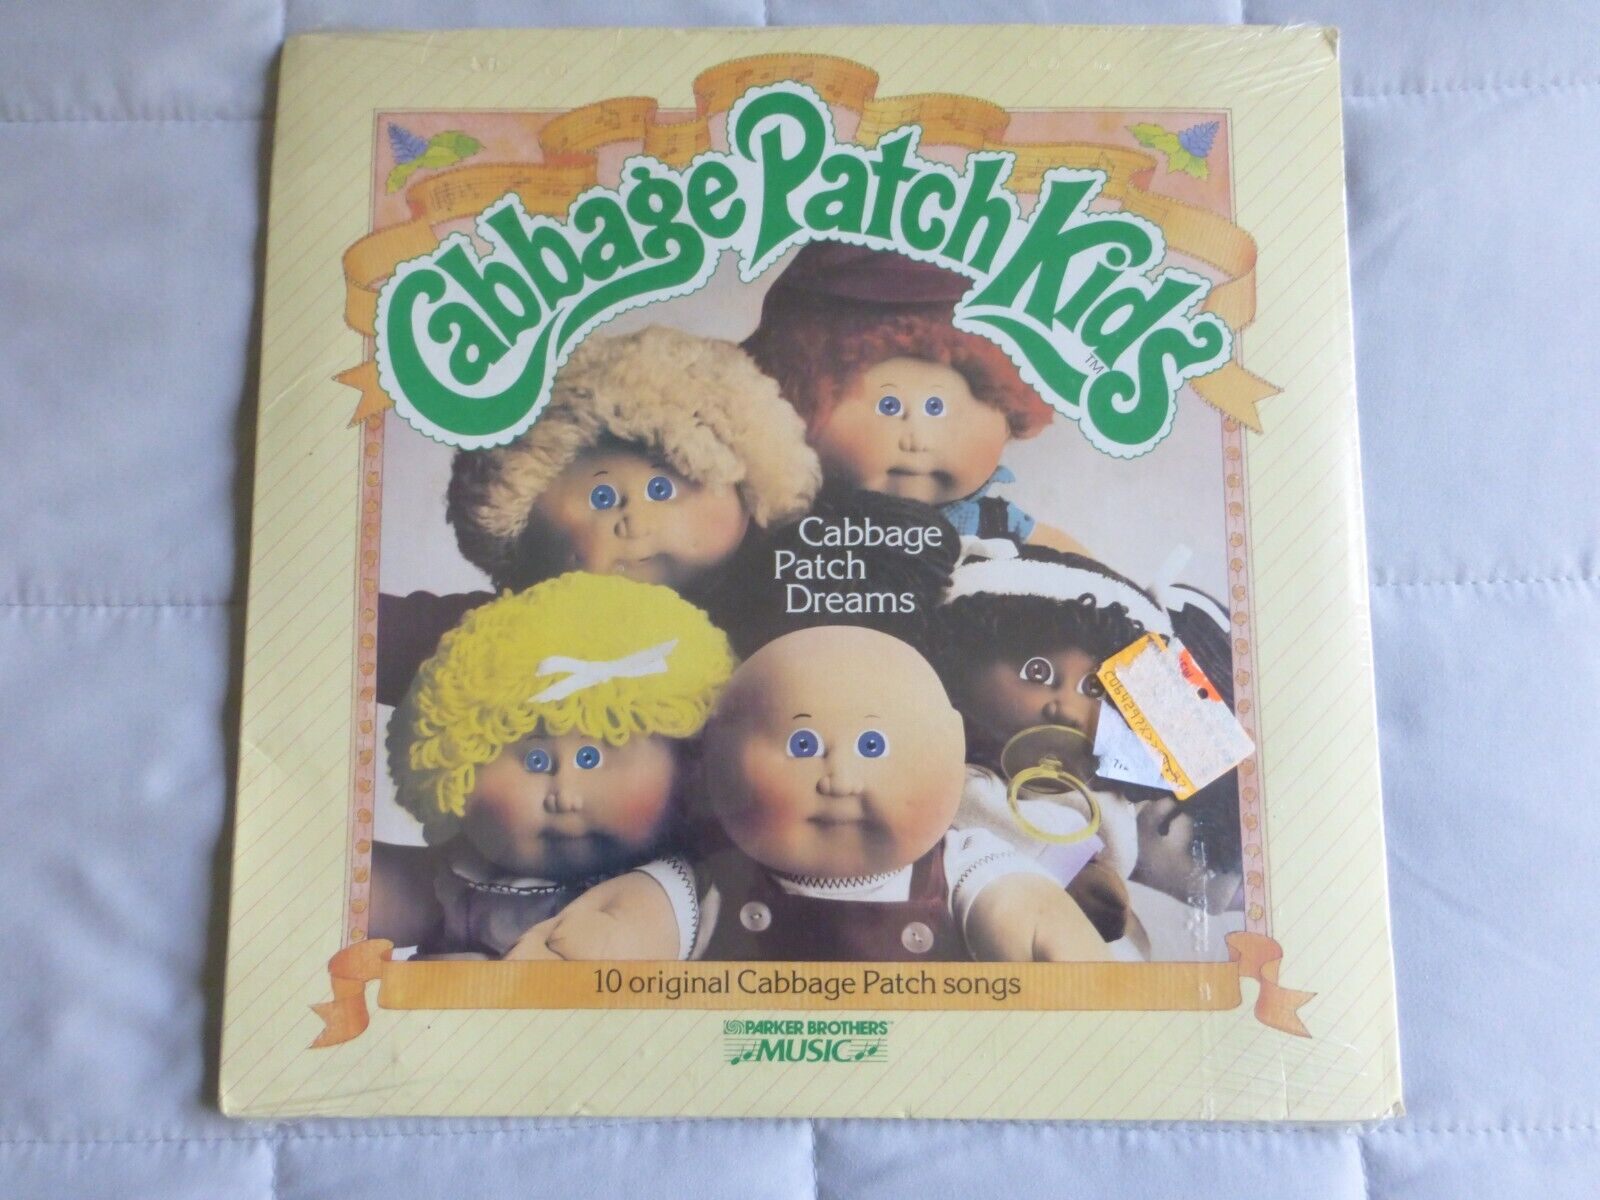 Cabbage Patch Kids – Cabbage Patch Dreams 1984 Vinyl LP New Sealed